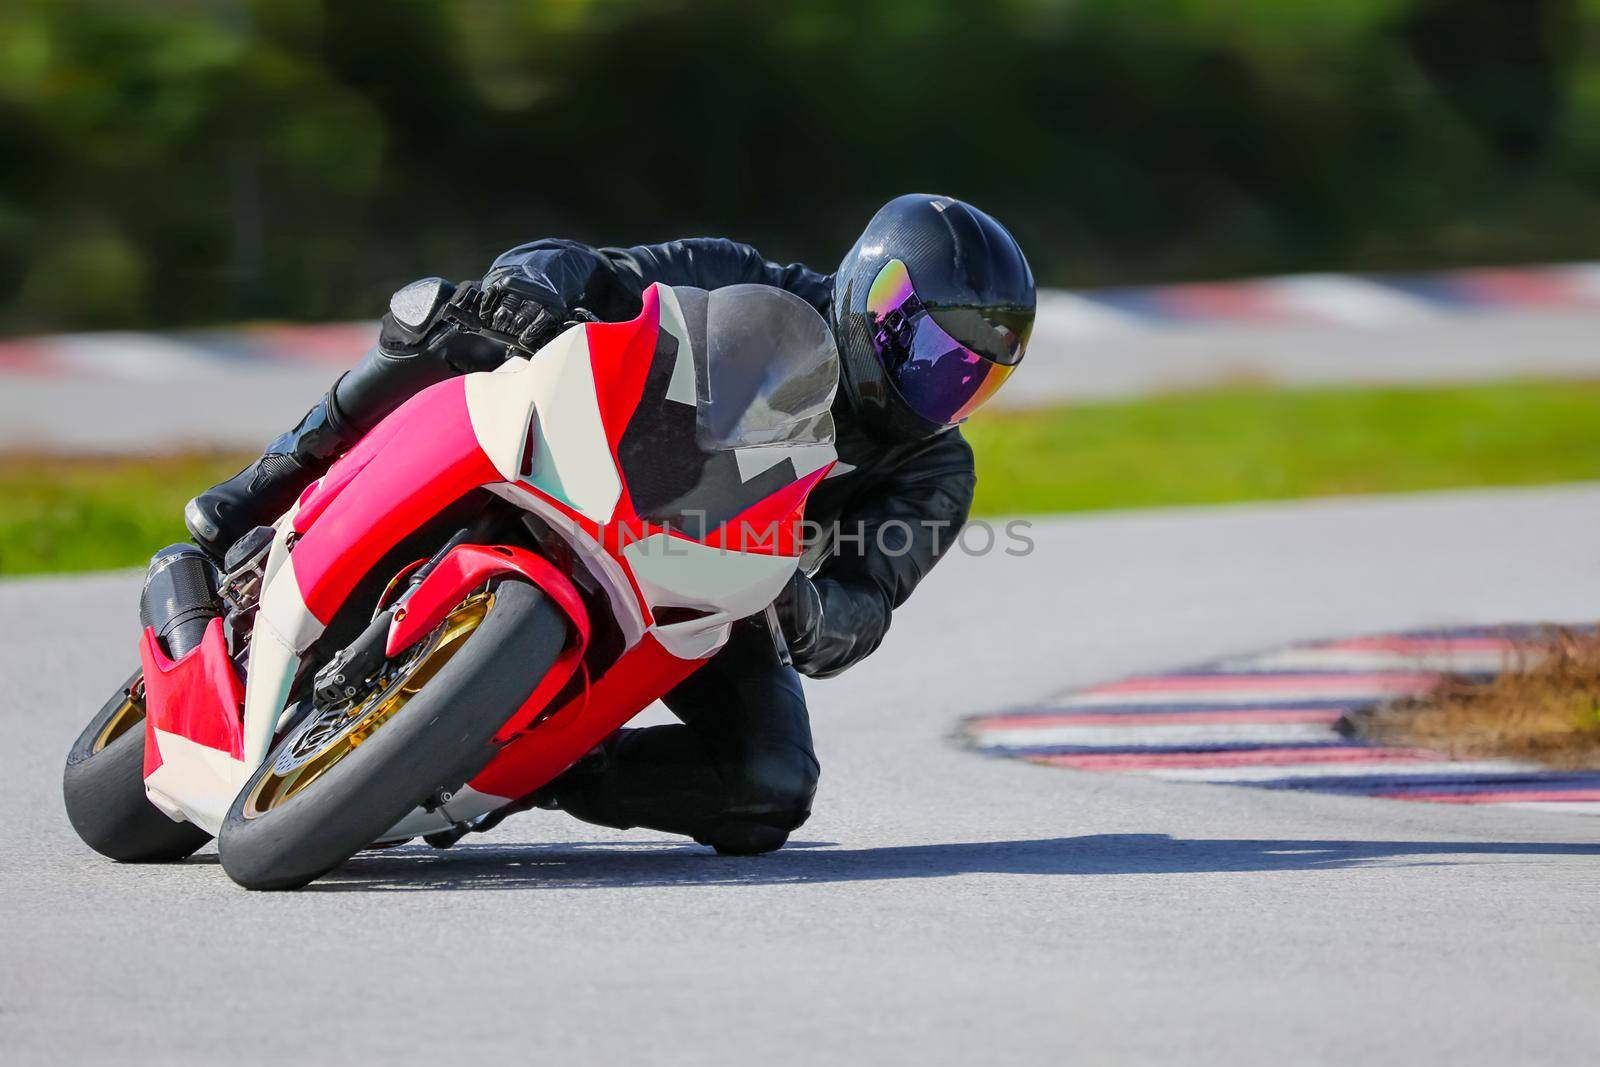 Motorcycle leaning into a fast corner on race track by toa55